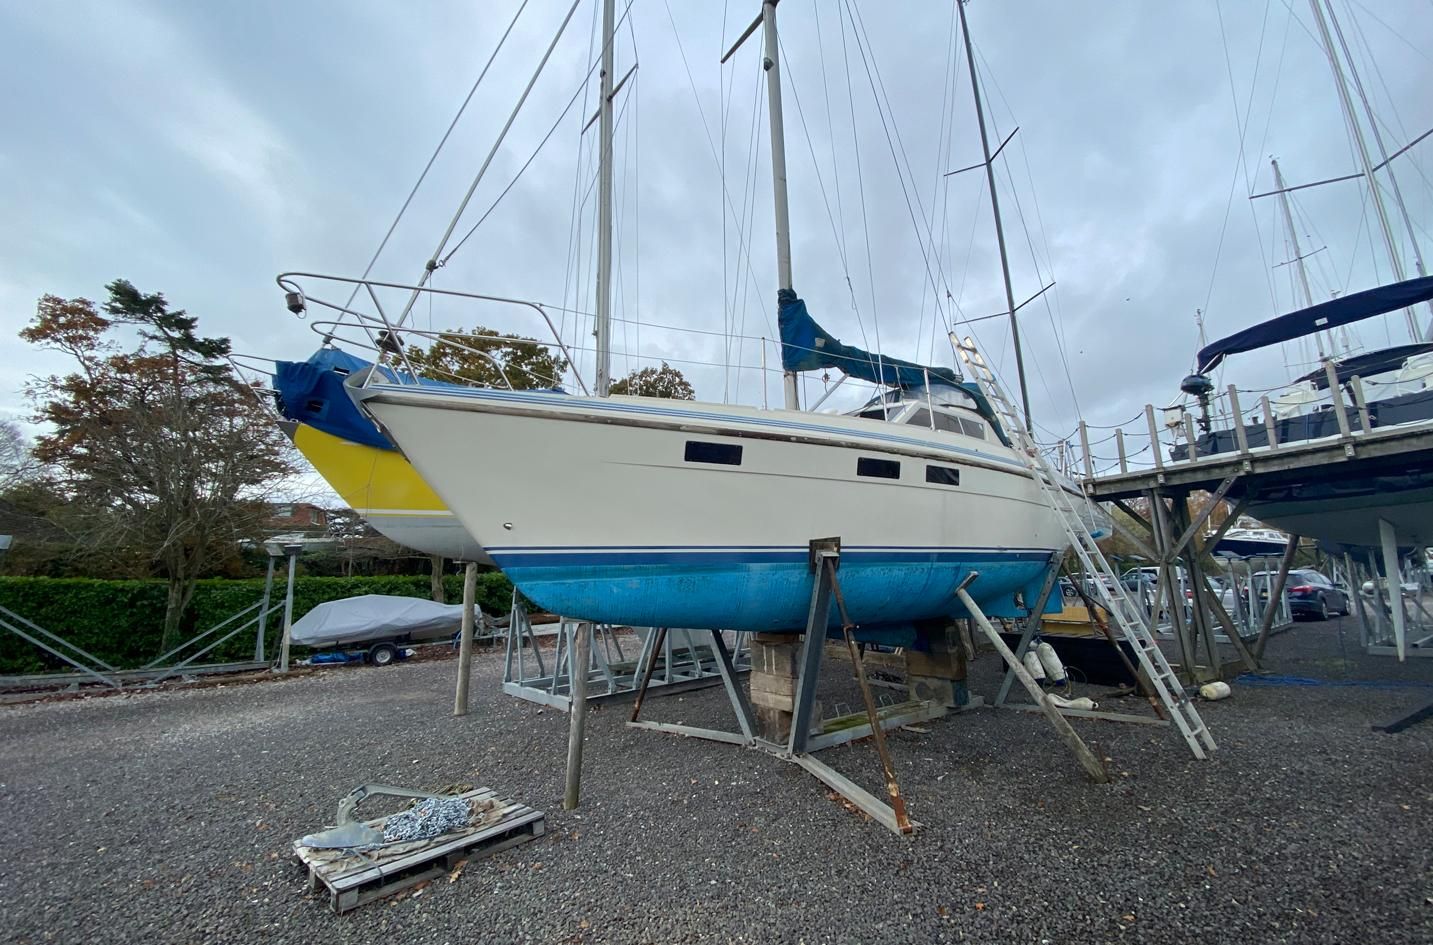 1987 Southerly 100 Lifting Keel Cruiser For Sale Yachtworld 